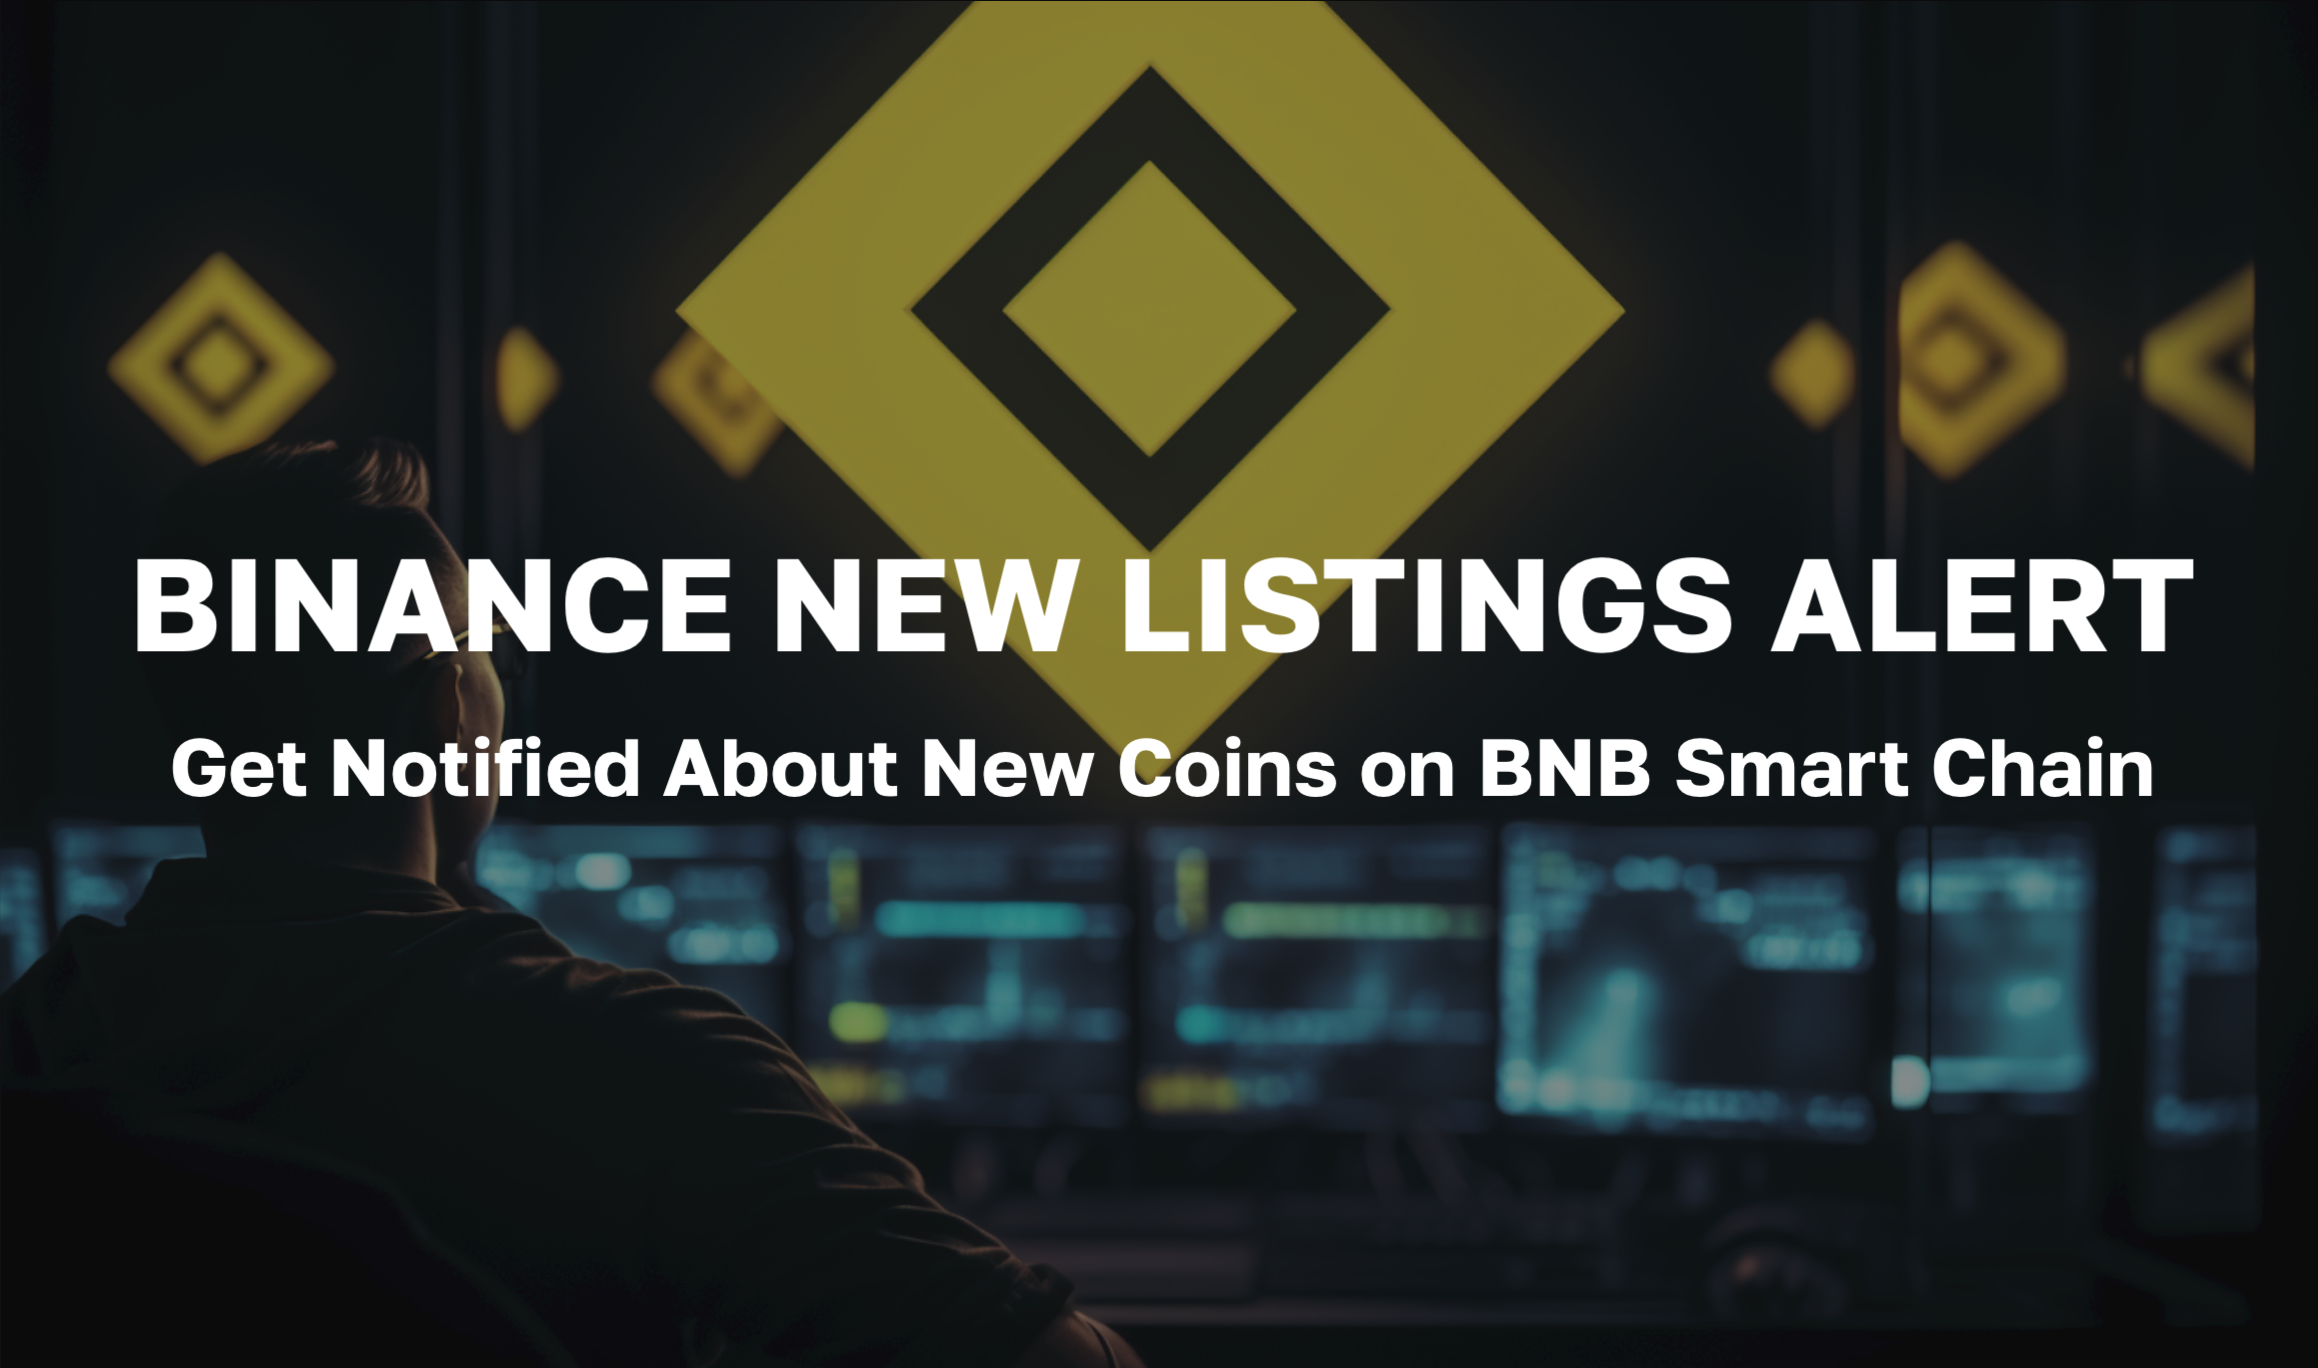 25 Upcoming Binance Listings to Watch in March 